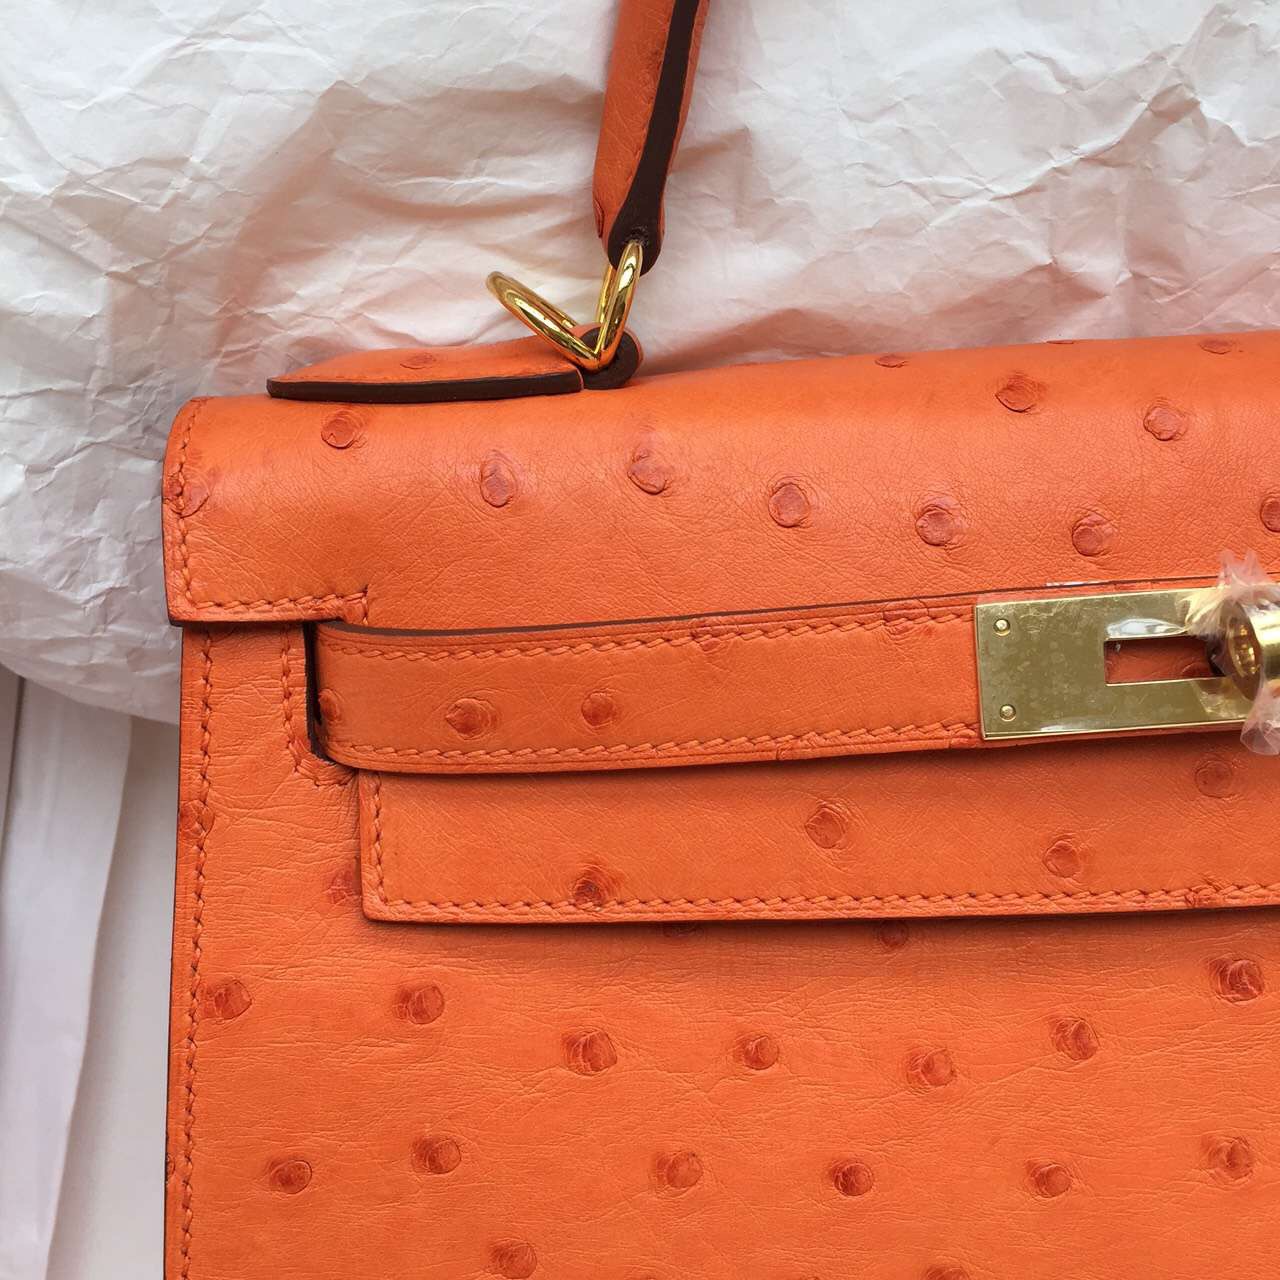 Hand Stitching Hermes Ostrich Leather Sellier Kelly Bag 28CM in Orange